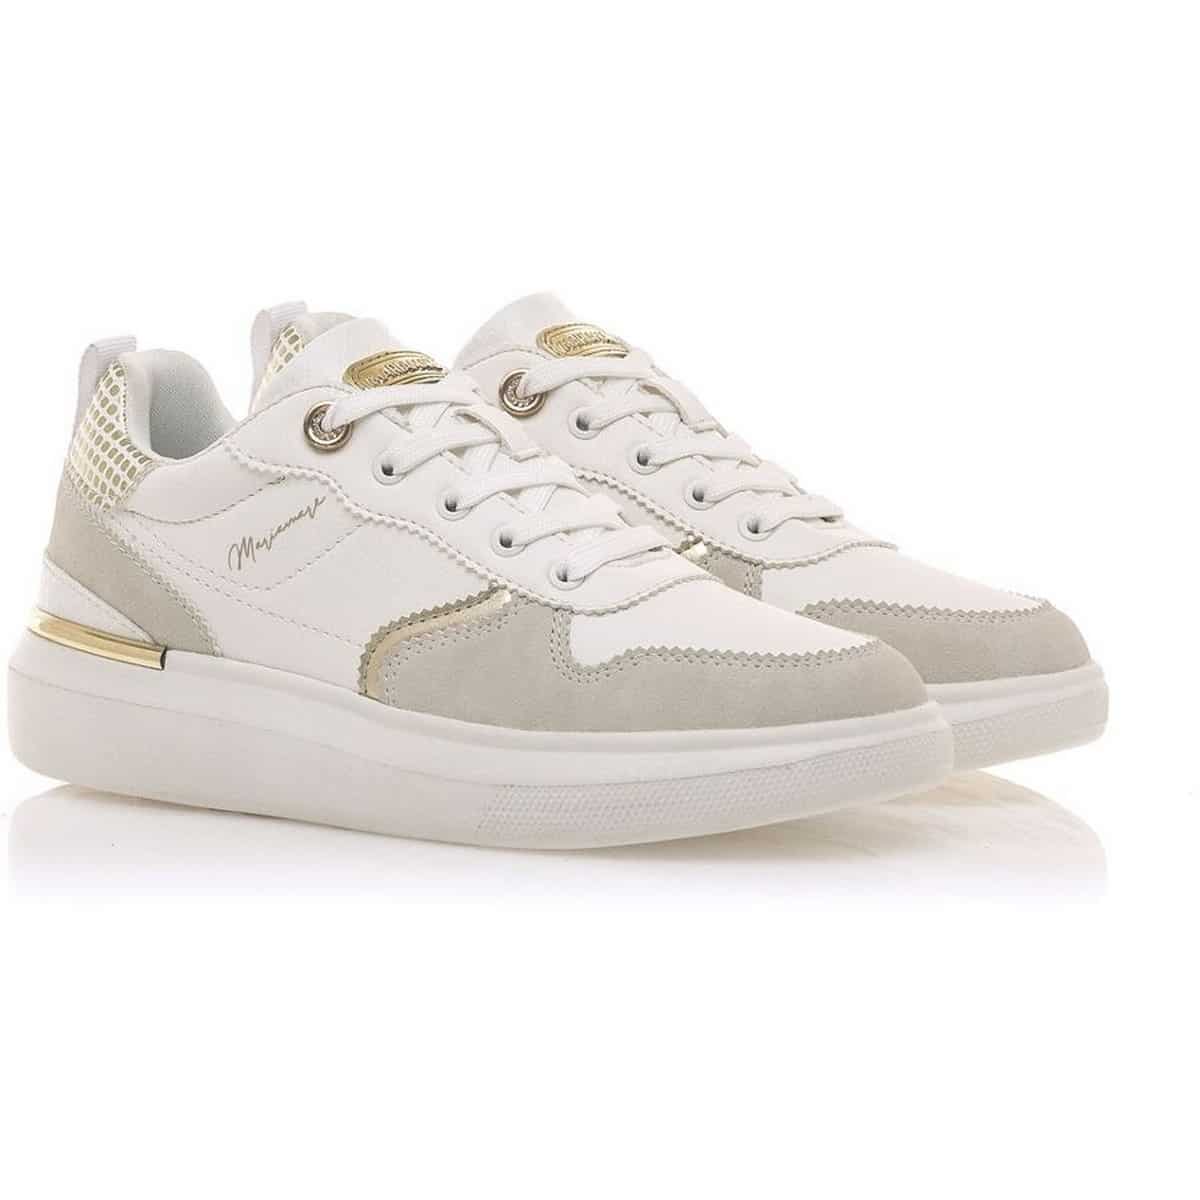 SNEAKERS WITH GOLDEN DETAILS MARIAMARE 63330 WHITE